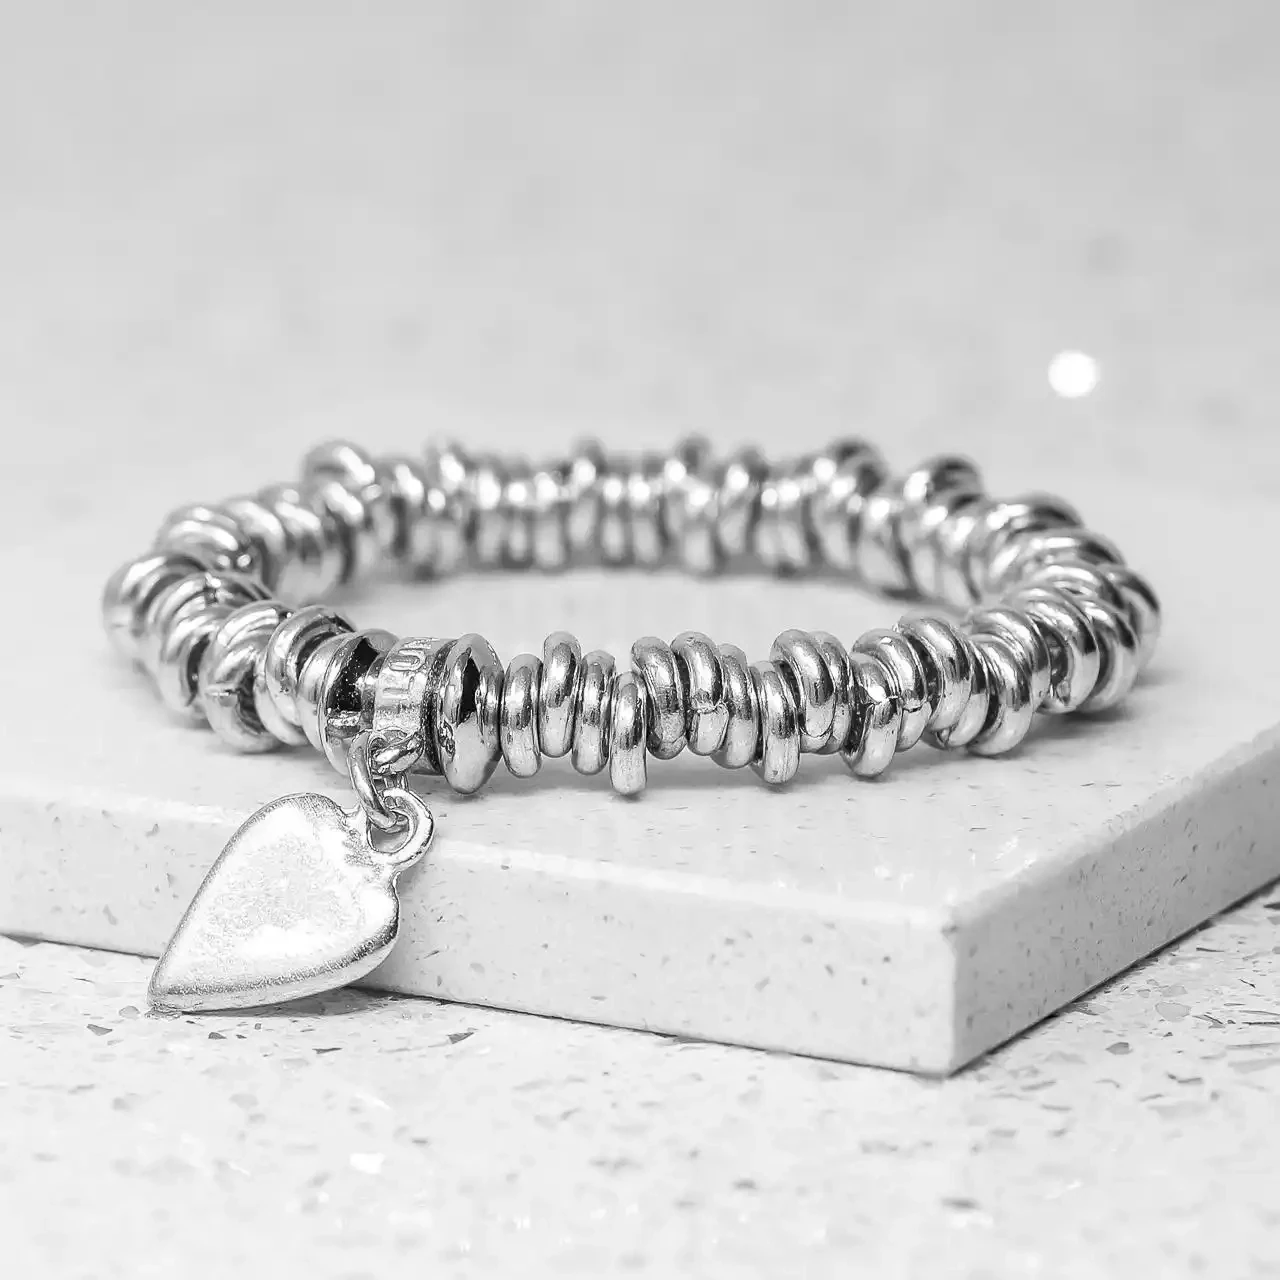 Multi Ring and Flat Heart Pewter Bracelet by Metal Planet